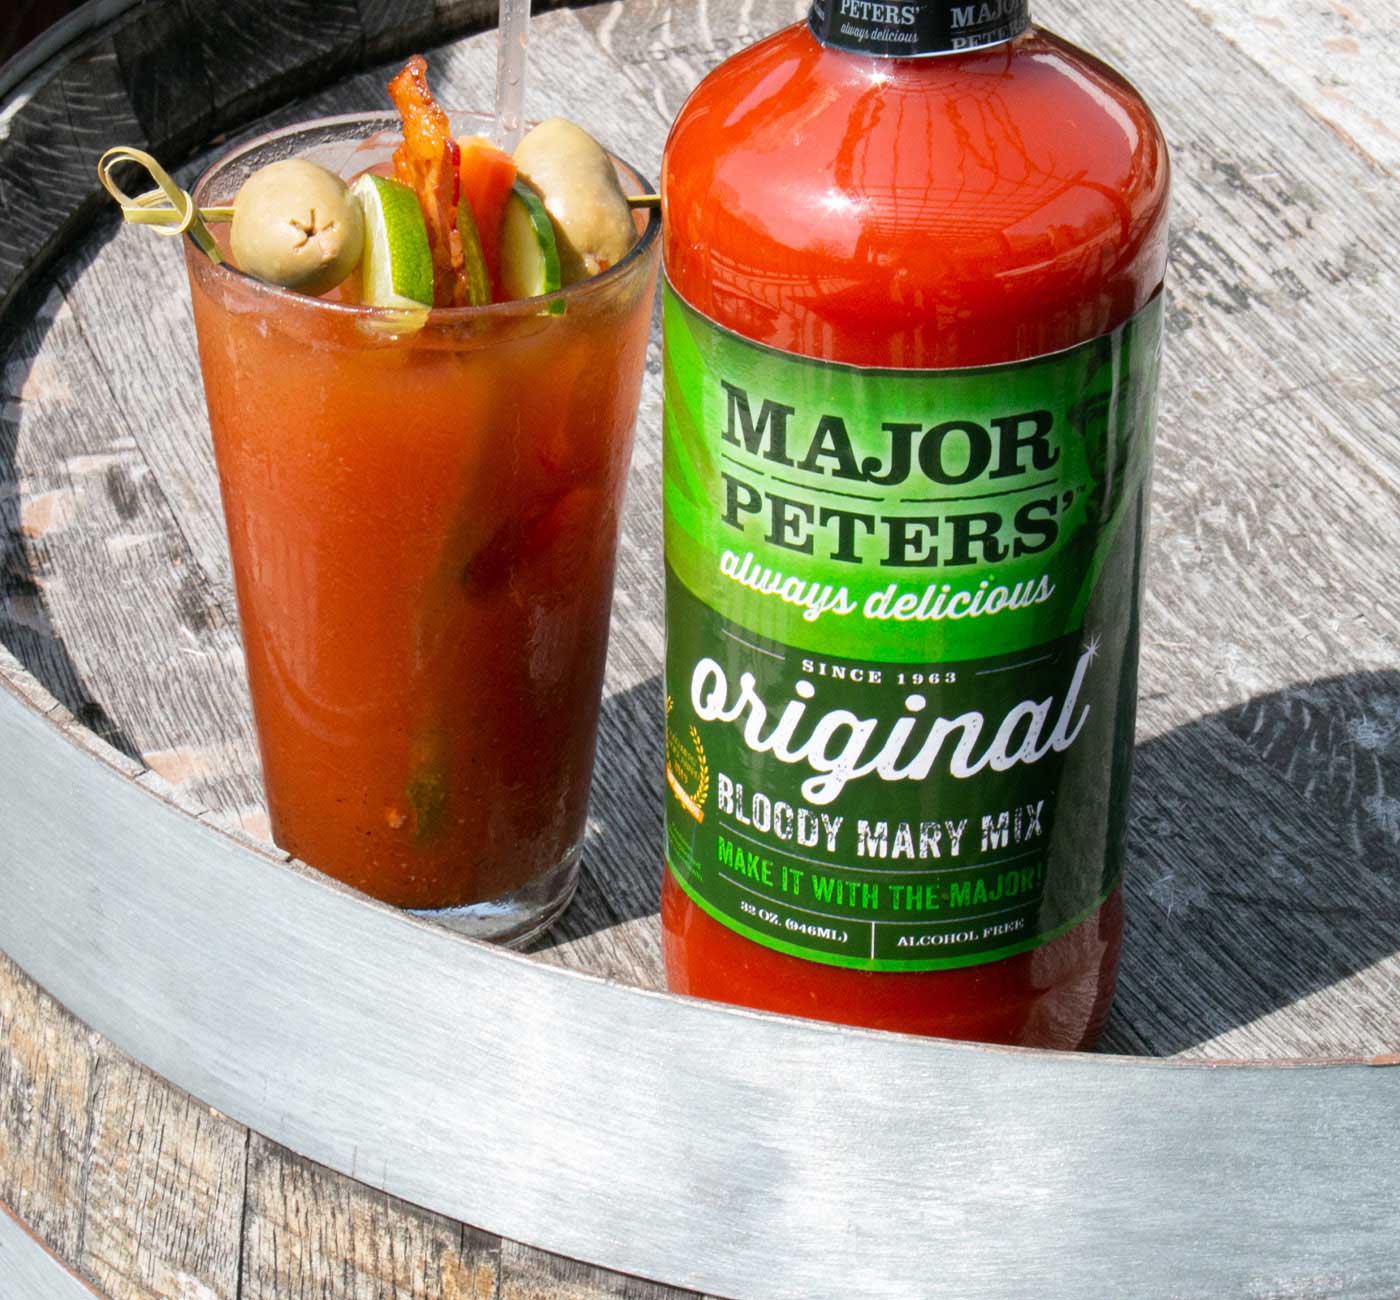 Major Peters Original Bloody Mary Mix, 32 Fluid Ounce -- 12 per case